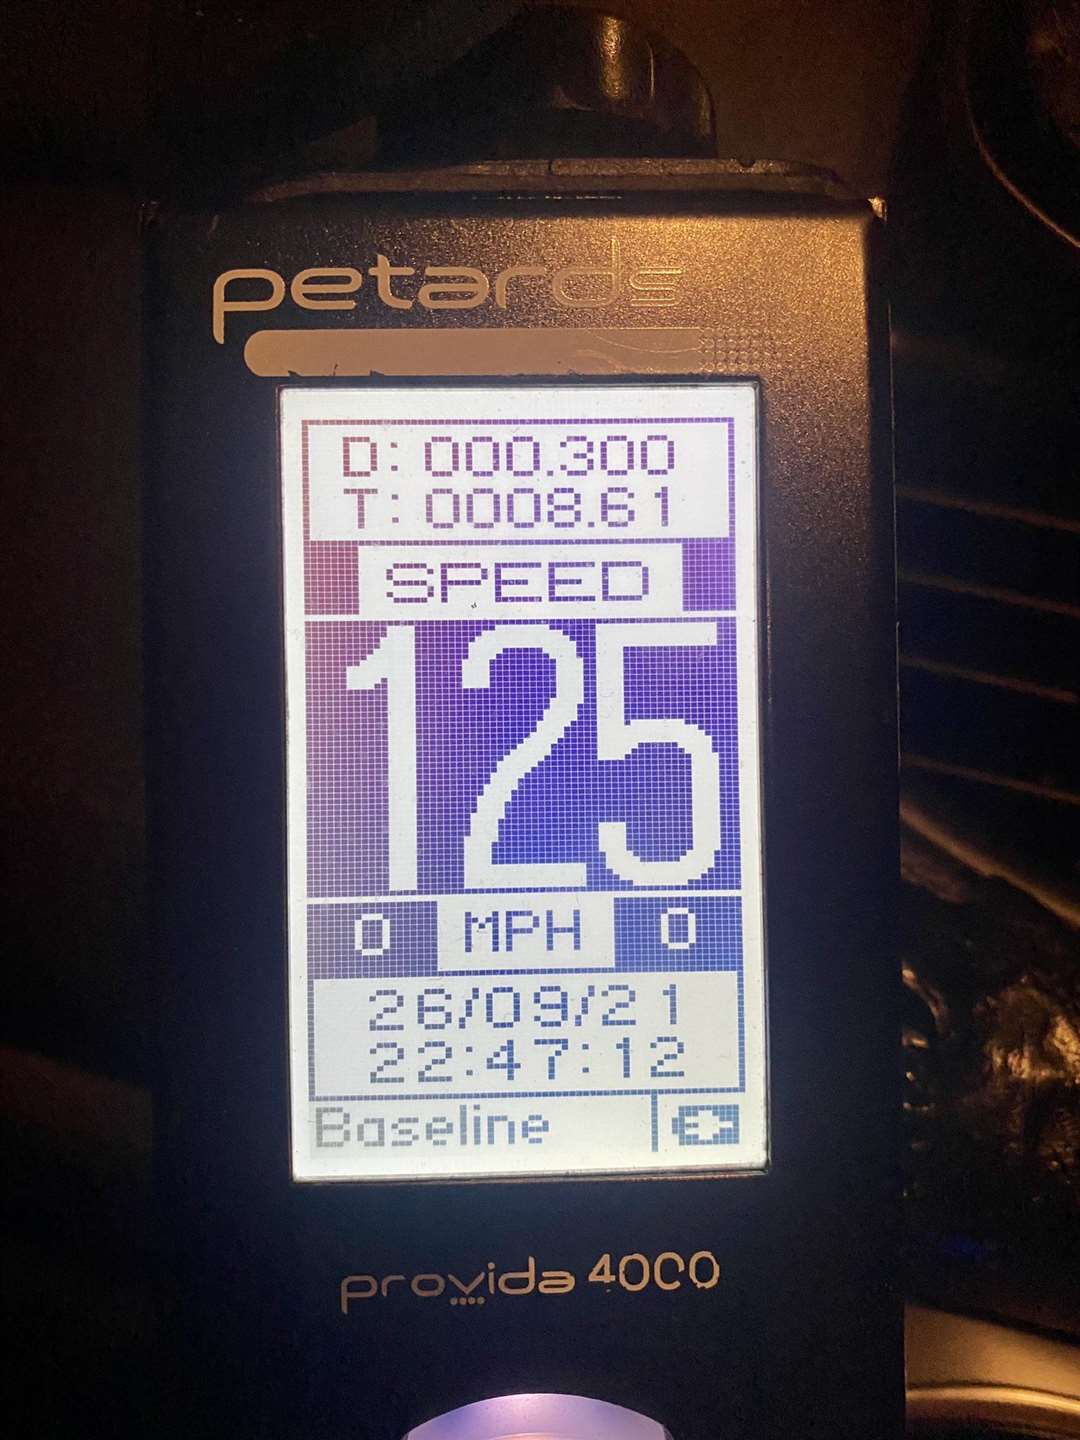 A driver was clocked doing 125mph on the A2 near Gravesend, according to police. Photo: KentPolice RPU (51626804)